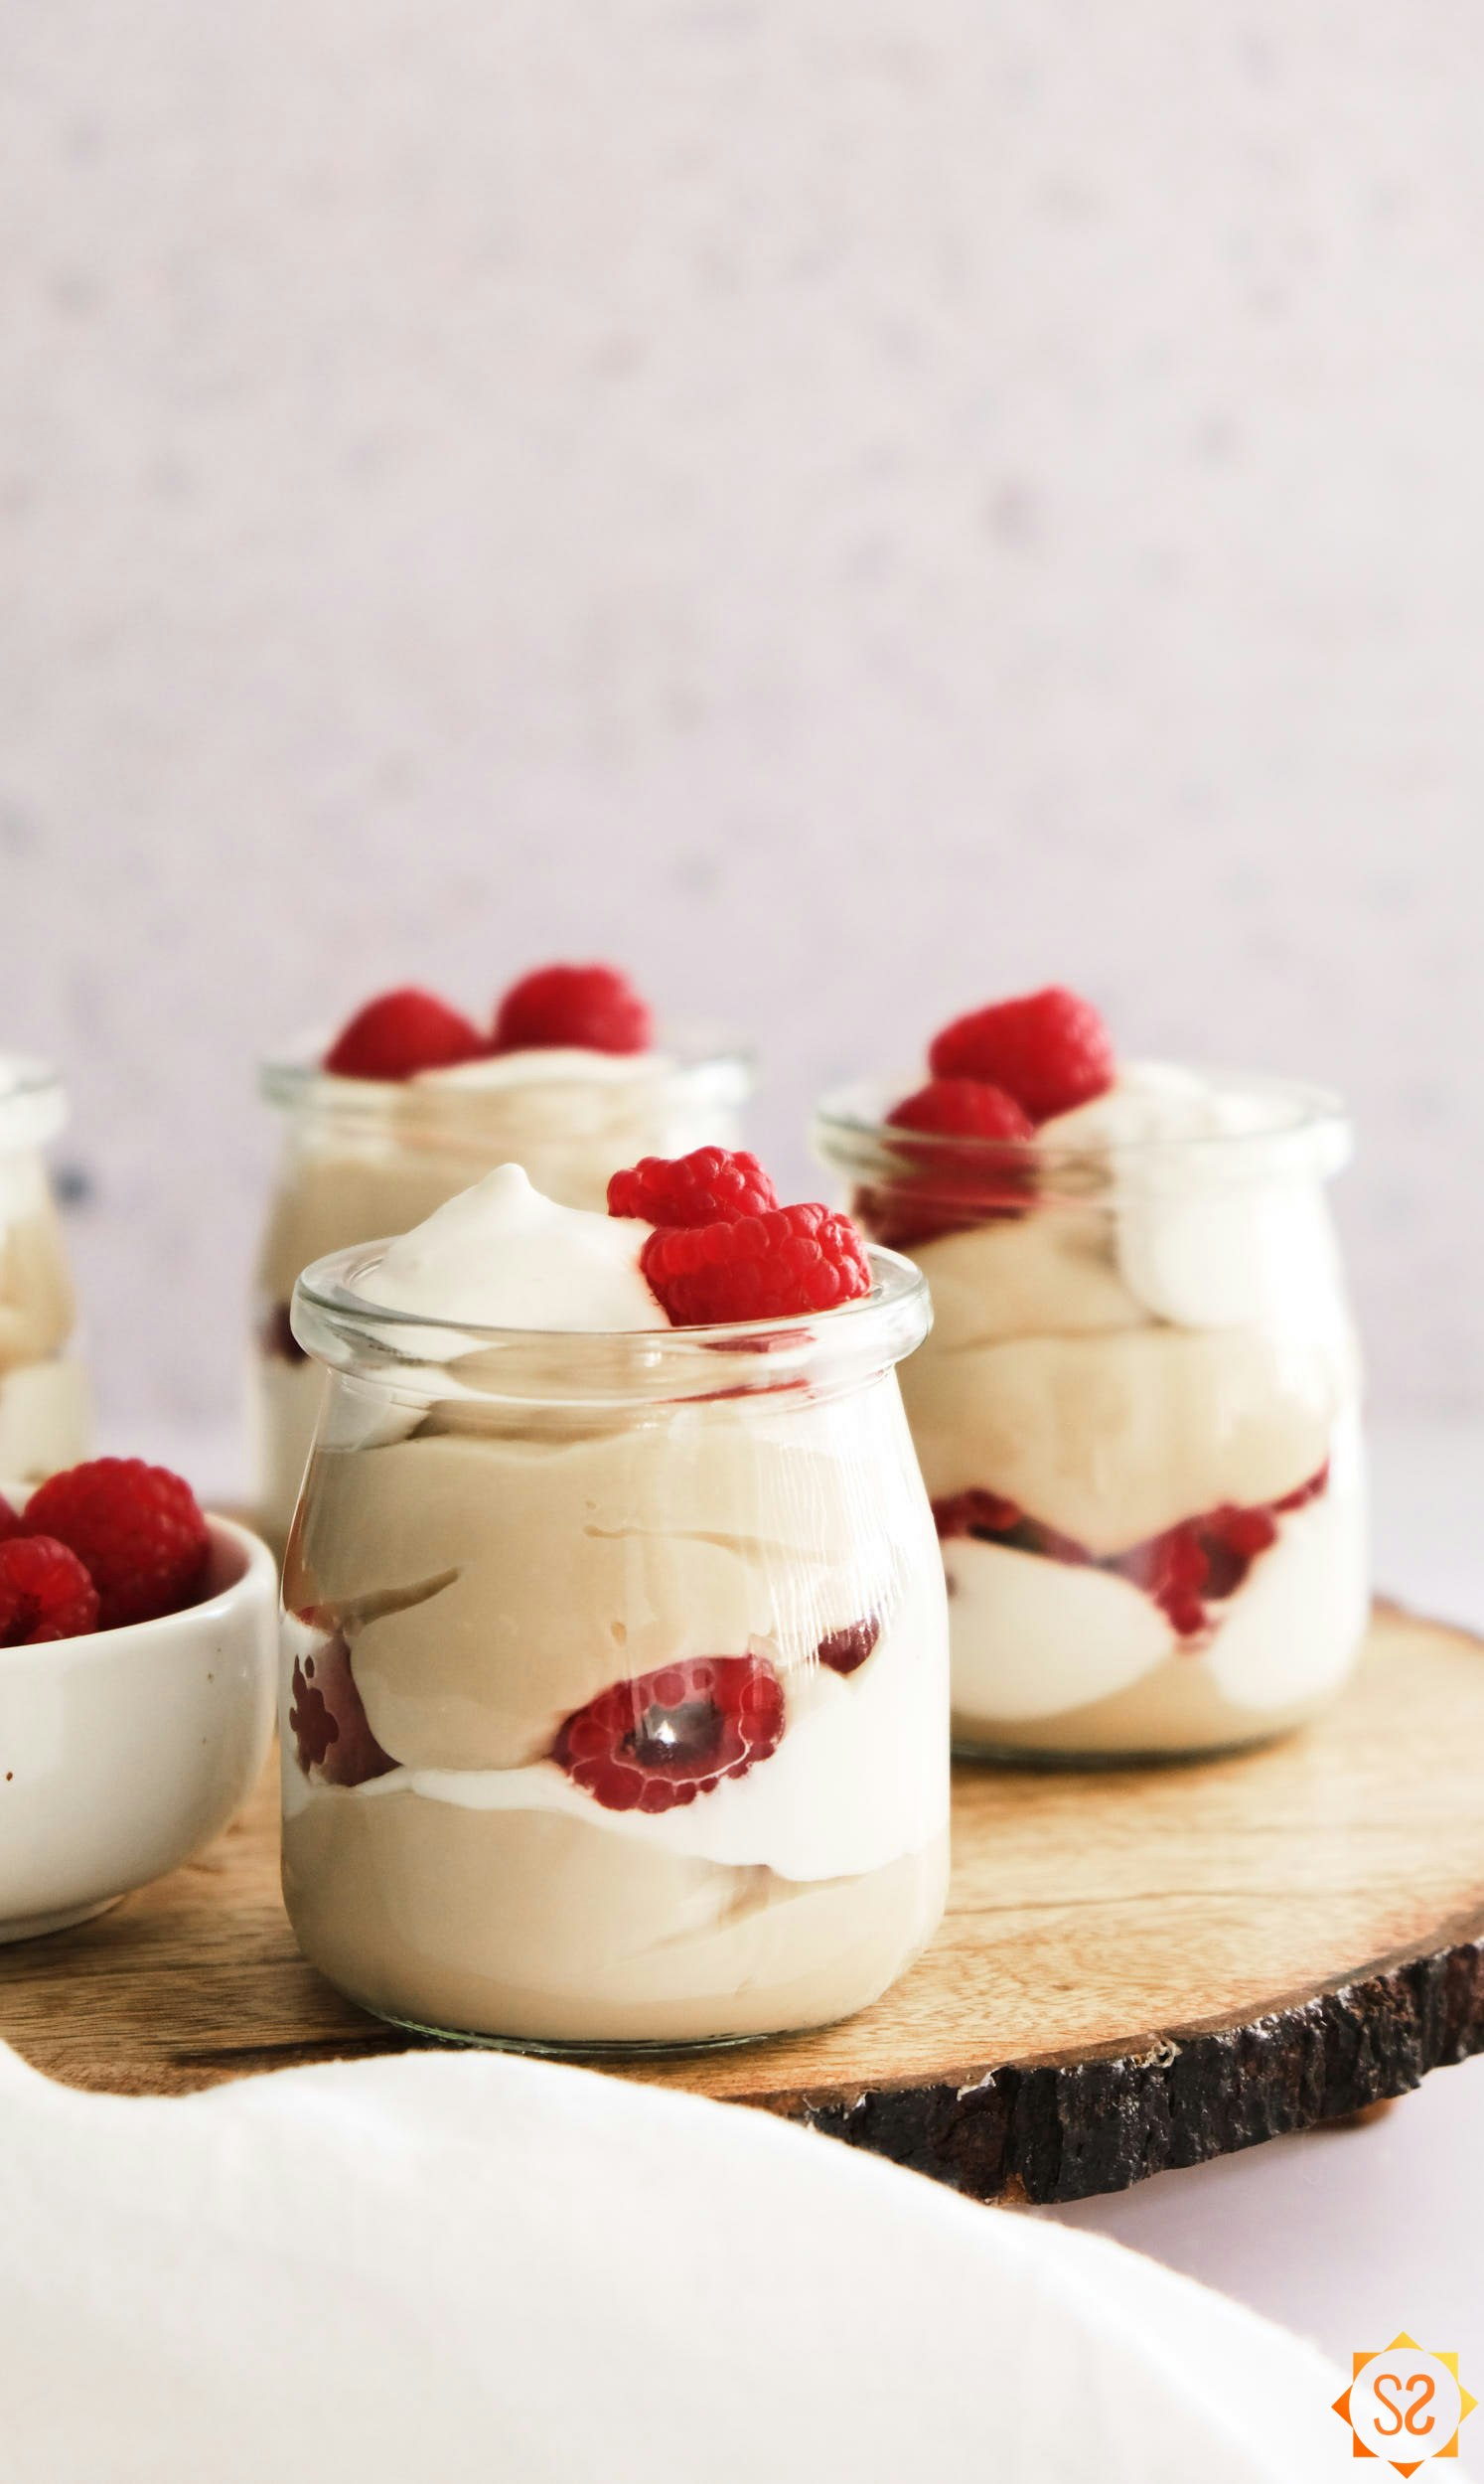 Vegan vanilla pudding in jars on wooden slab with raspberries and whipped cream